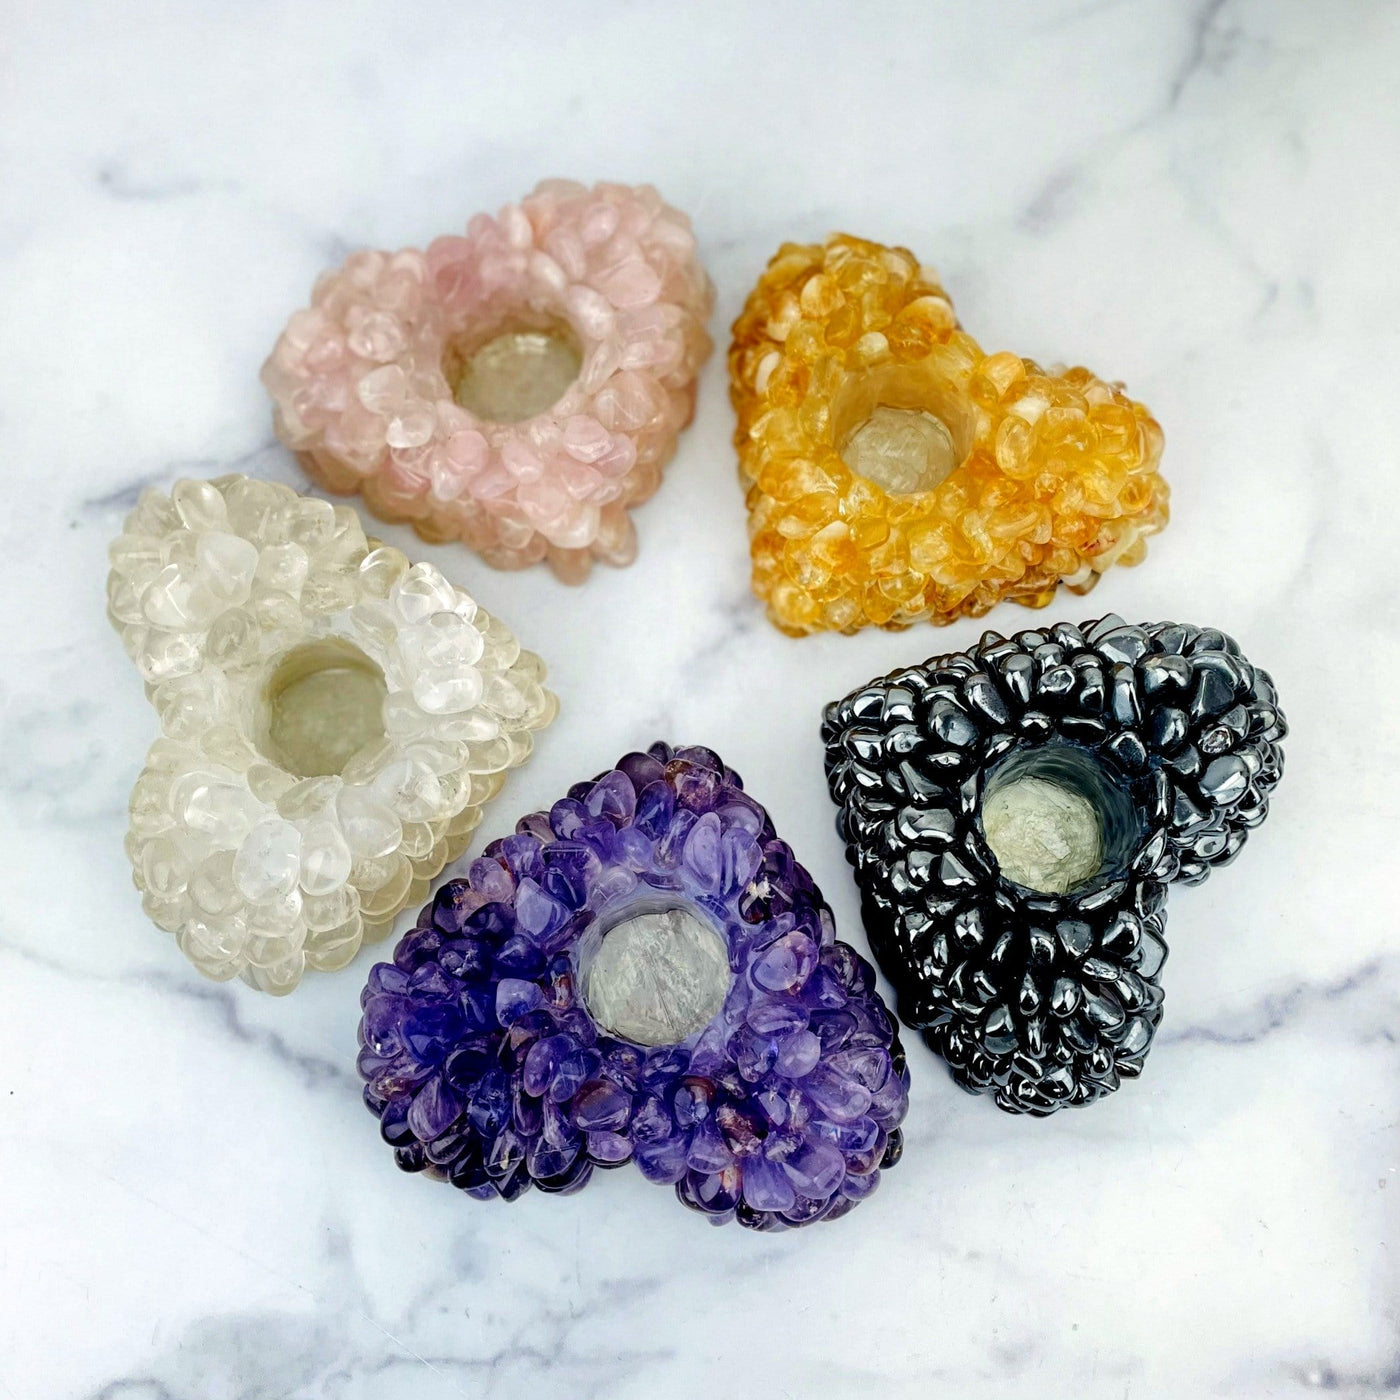 5 Tumbled stone heart candle holders of different kinds on marble background